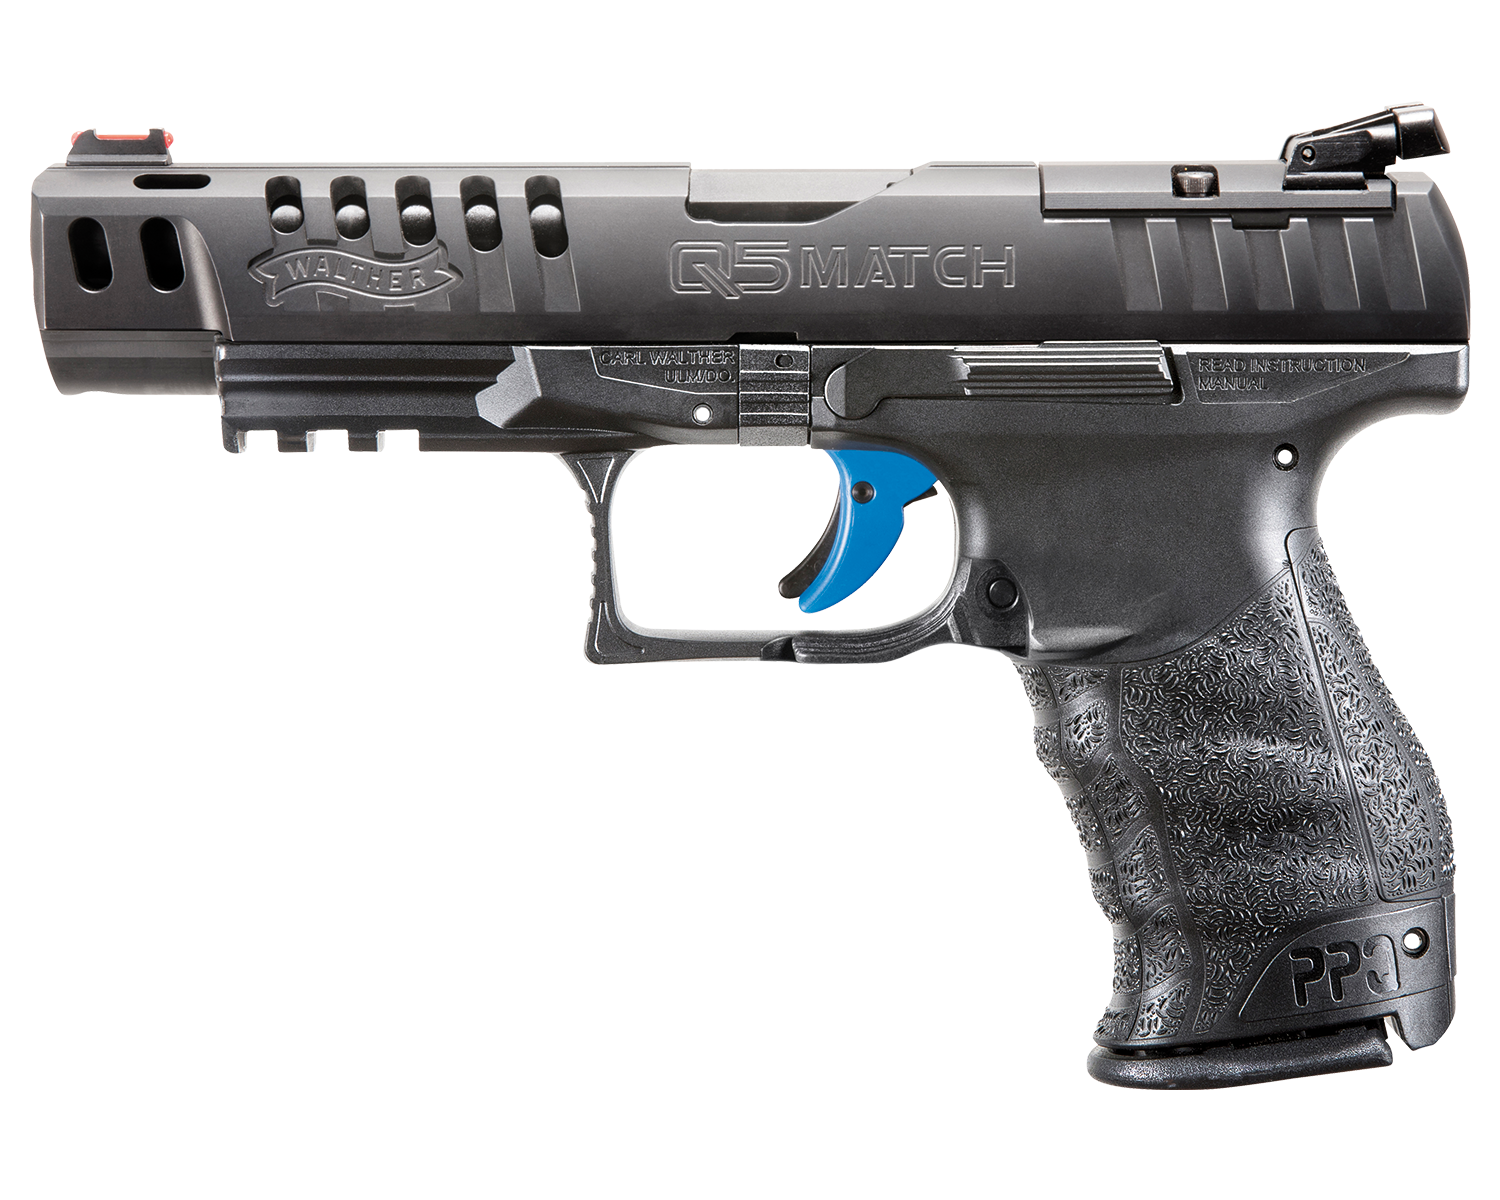 Walther Q5 Match M1